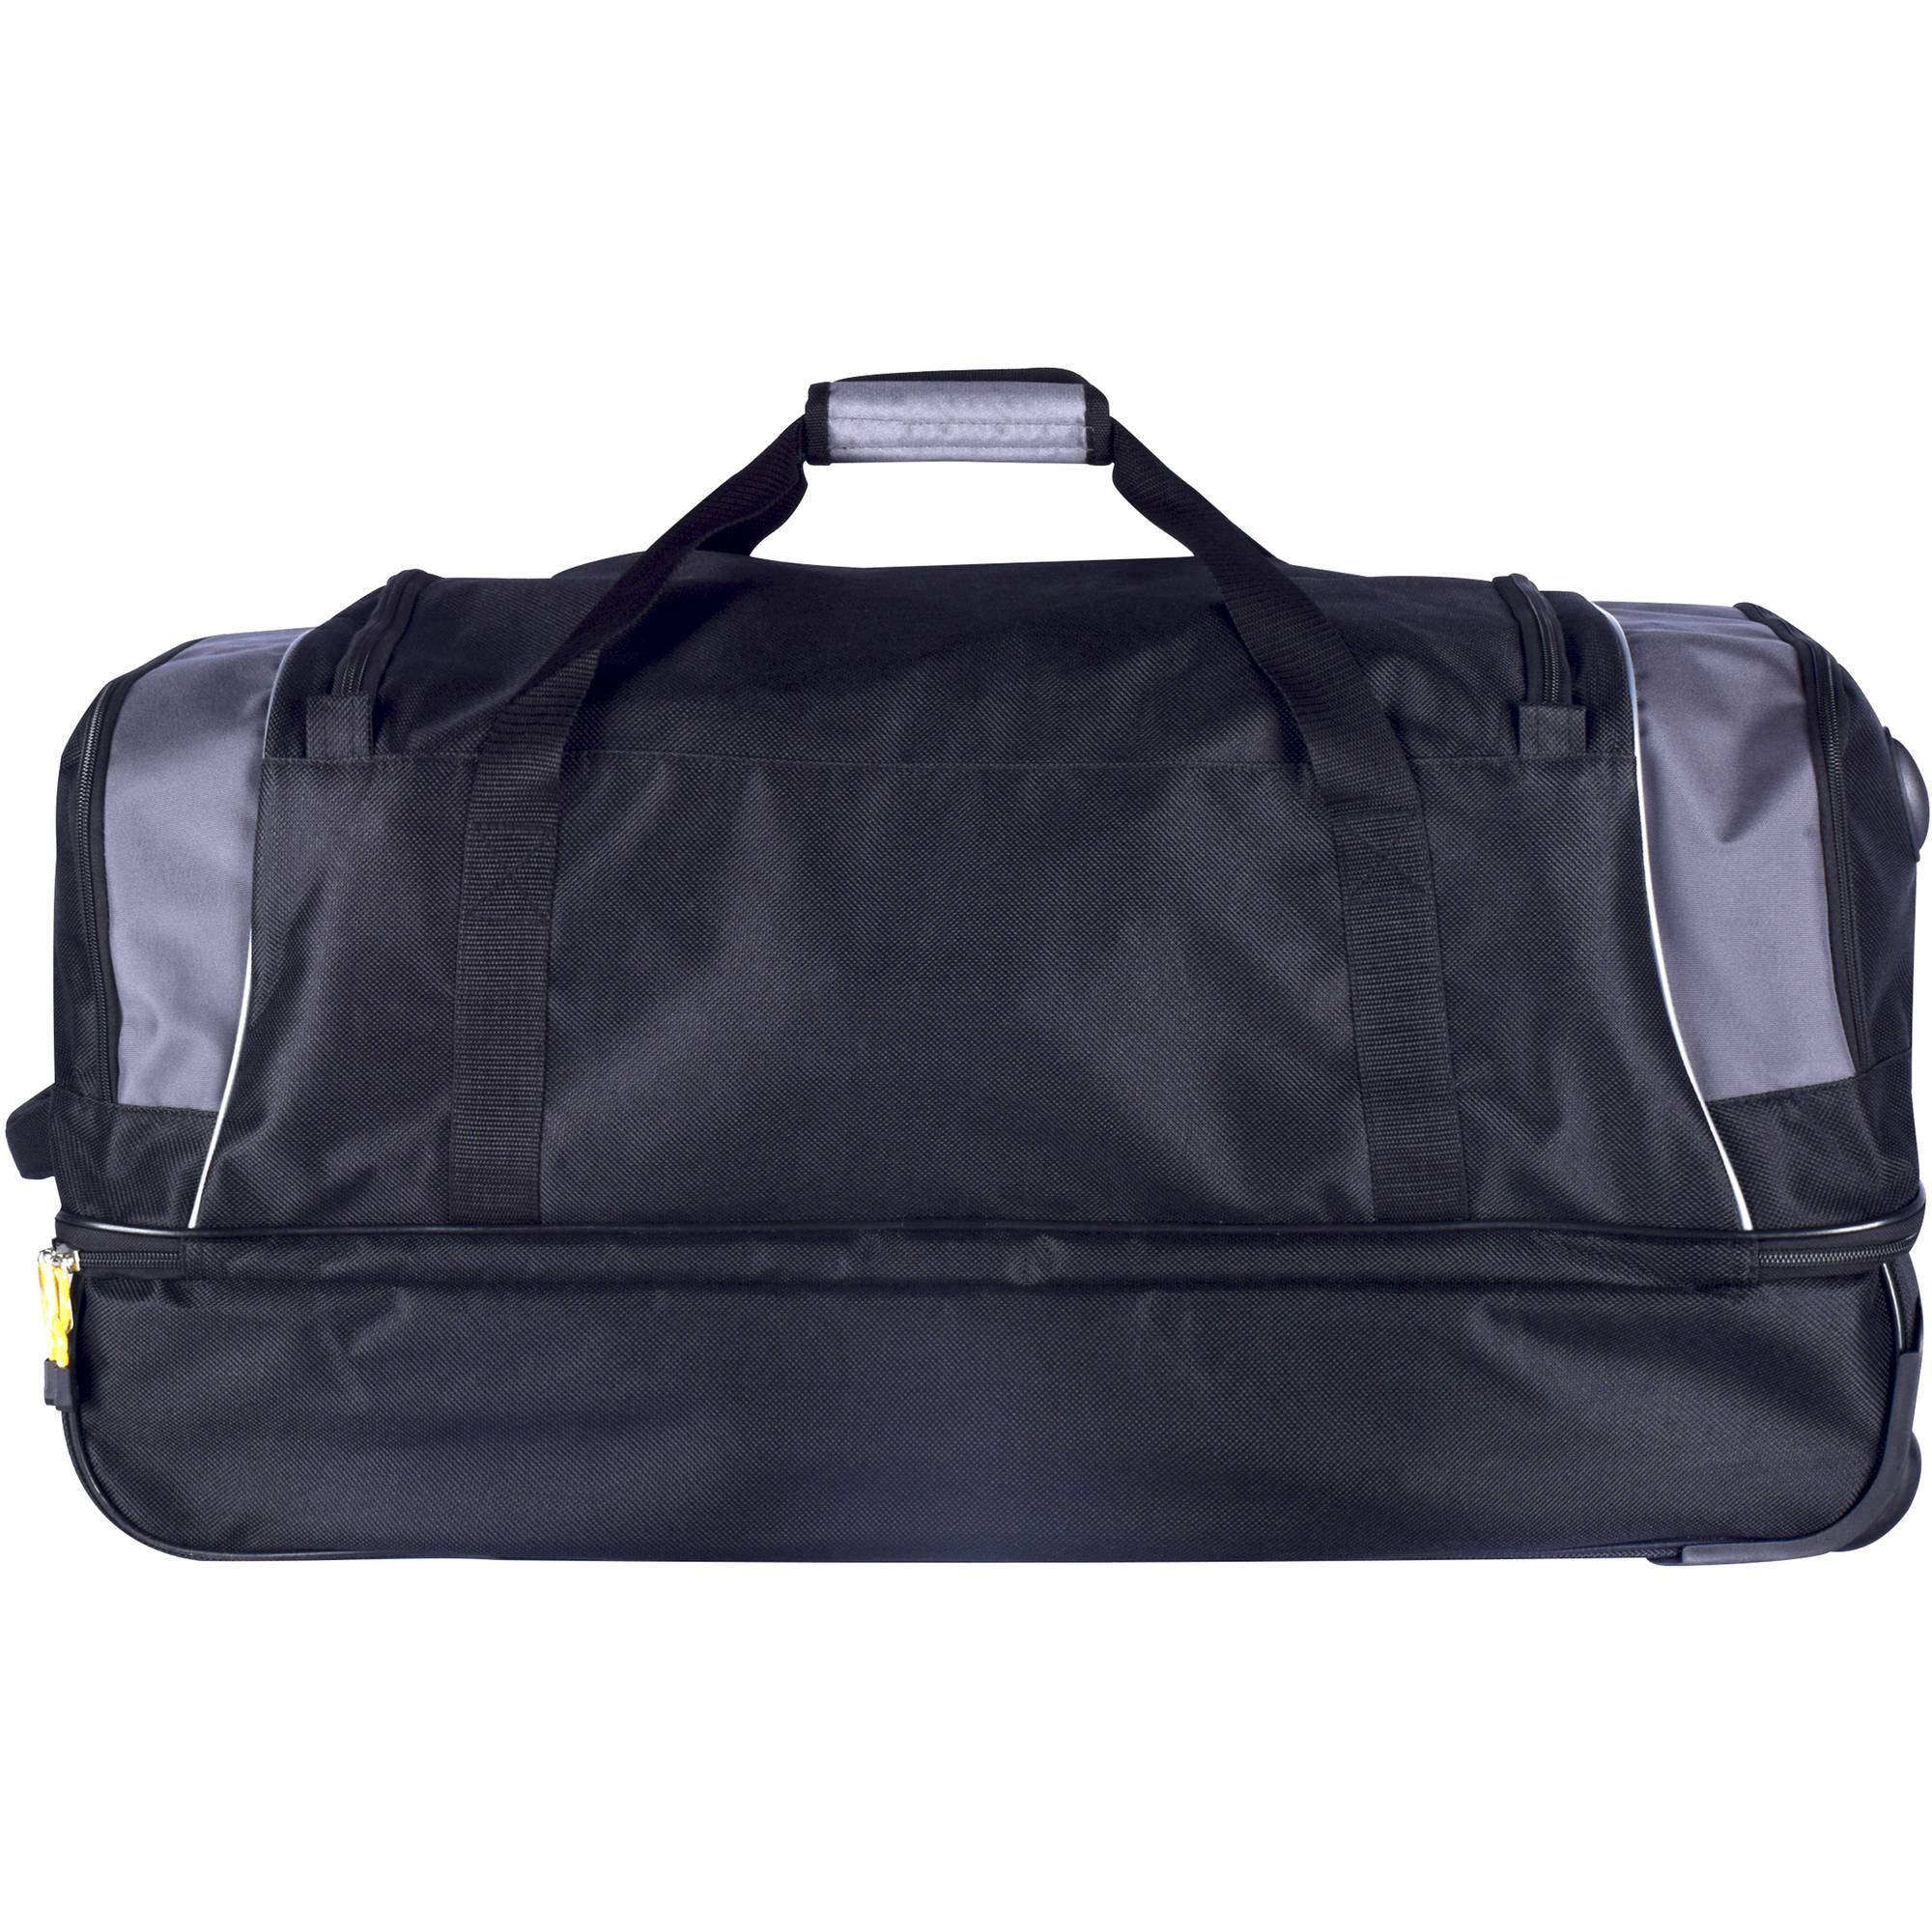 Travelers Club Adventurer 30" 2-Section Drop-Bottom Rolling Duffel Travel Luggage - Black with Gray - image 3 of 8